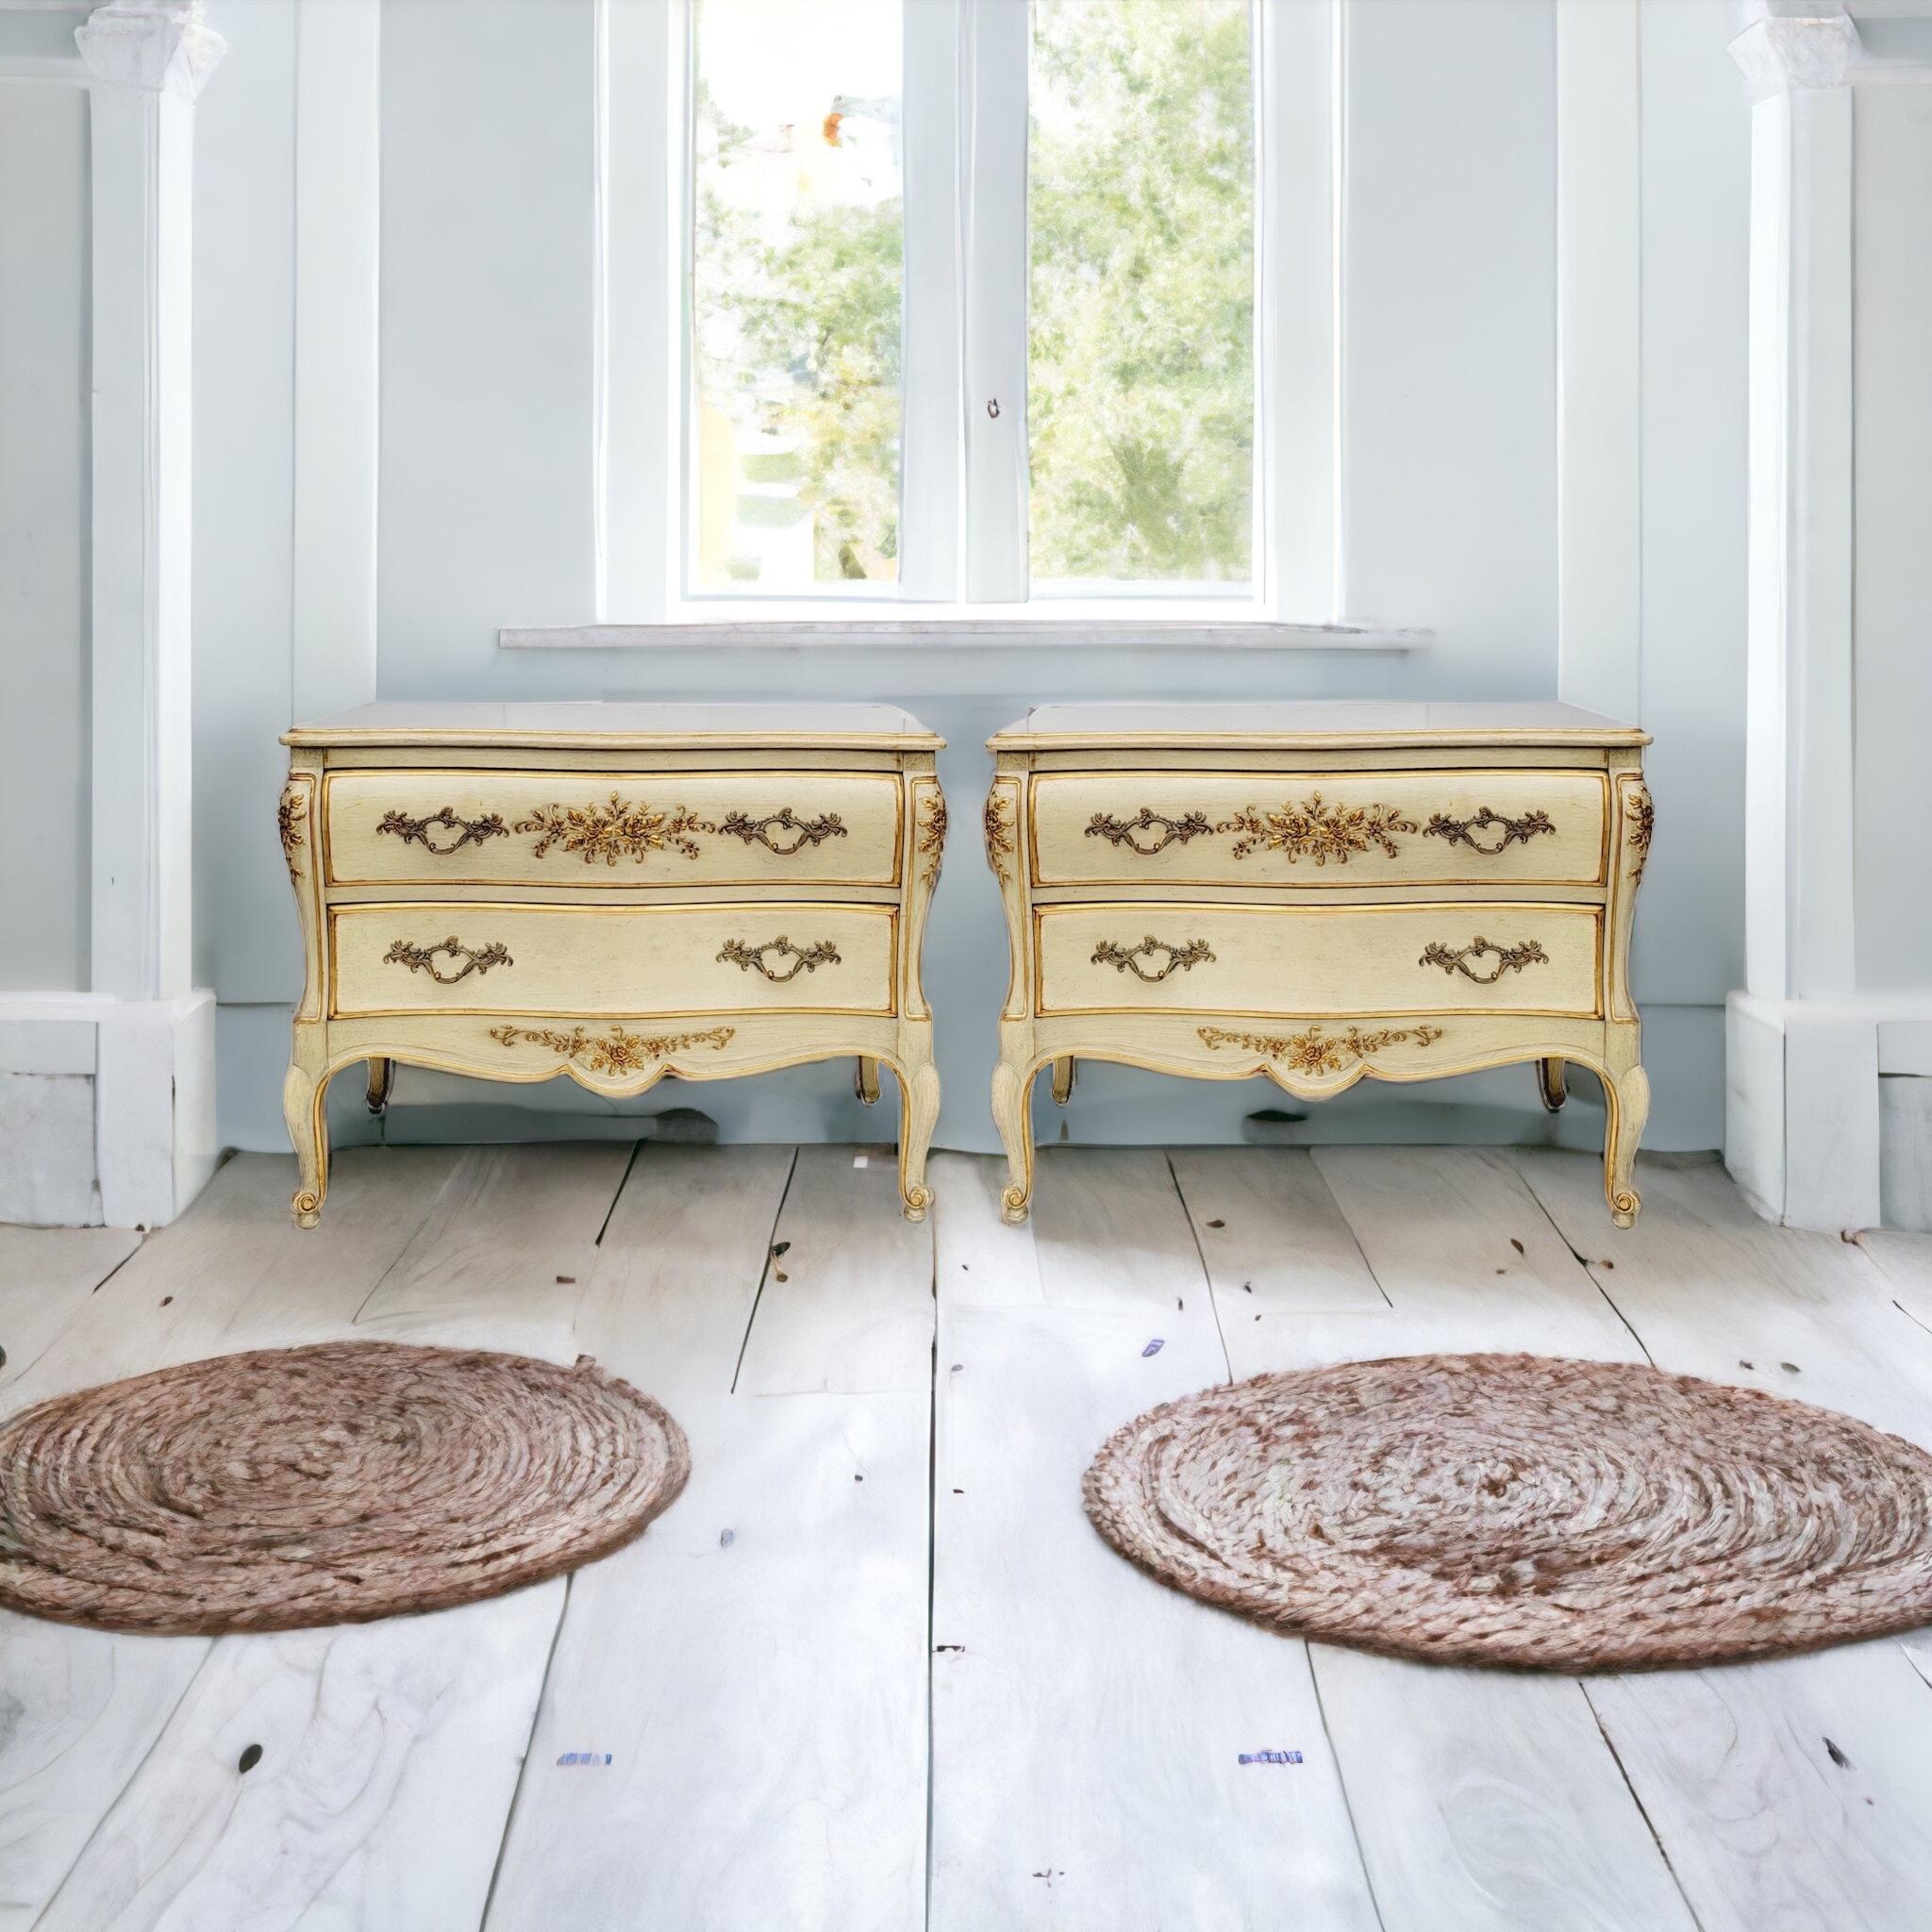 This is a pair of French Louis XV style painted commodes by Dixon out of Florida. They are ivory with gilt accents. The two drawers have dovetail construction. They are marked.